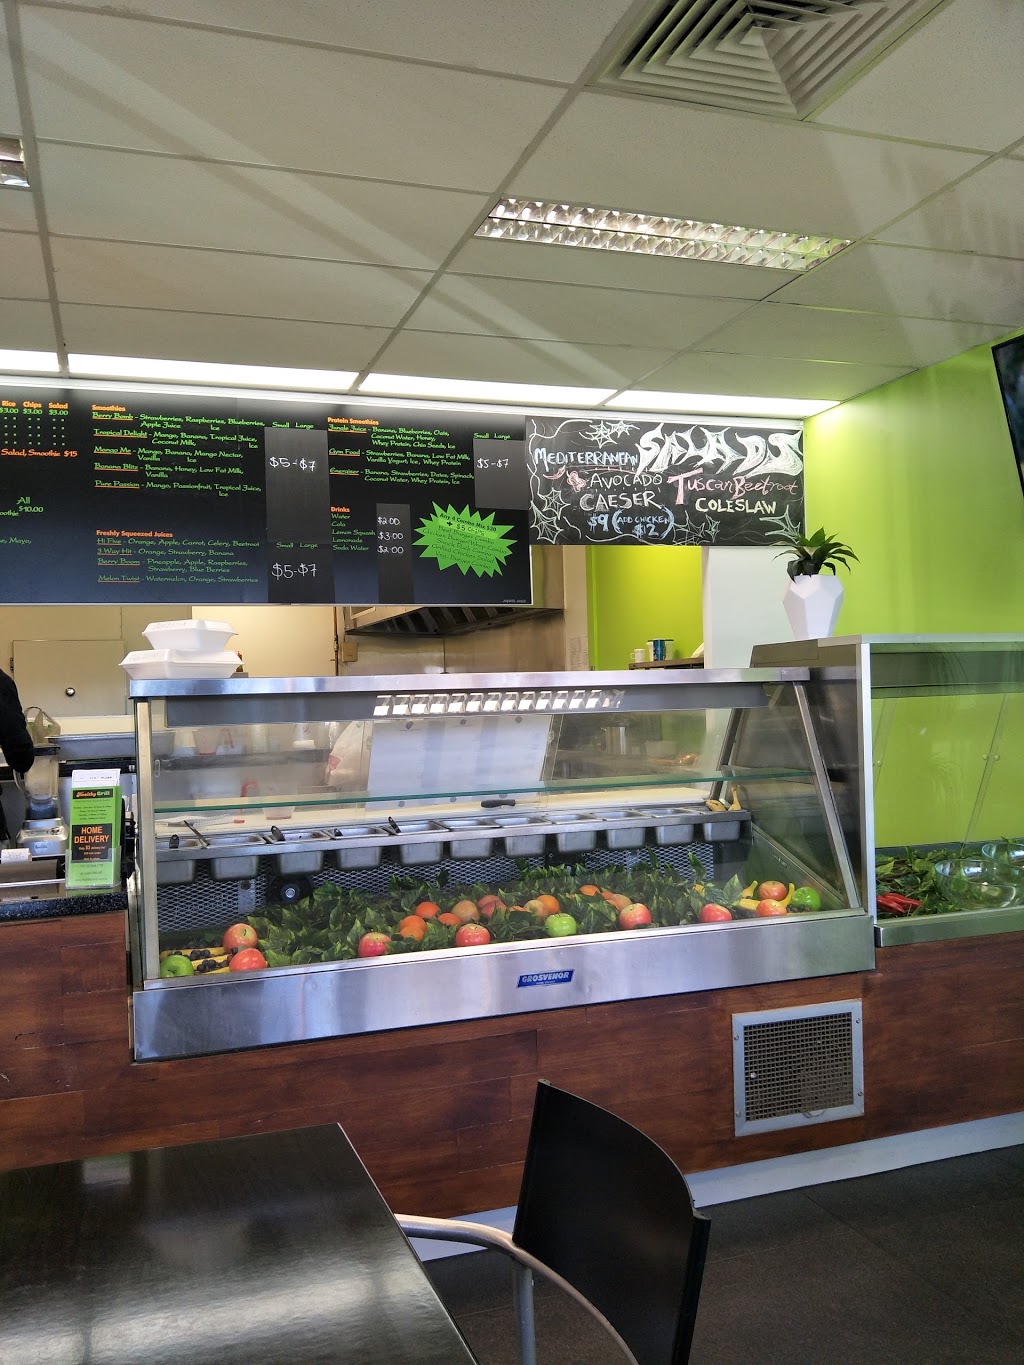 Healthy Grill | restaurant | 967 Point Nepean Rd, Rosebud VIC 3939, Australia | 0359867779 OR +61 3 5986 7779